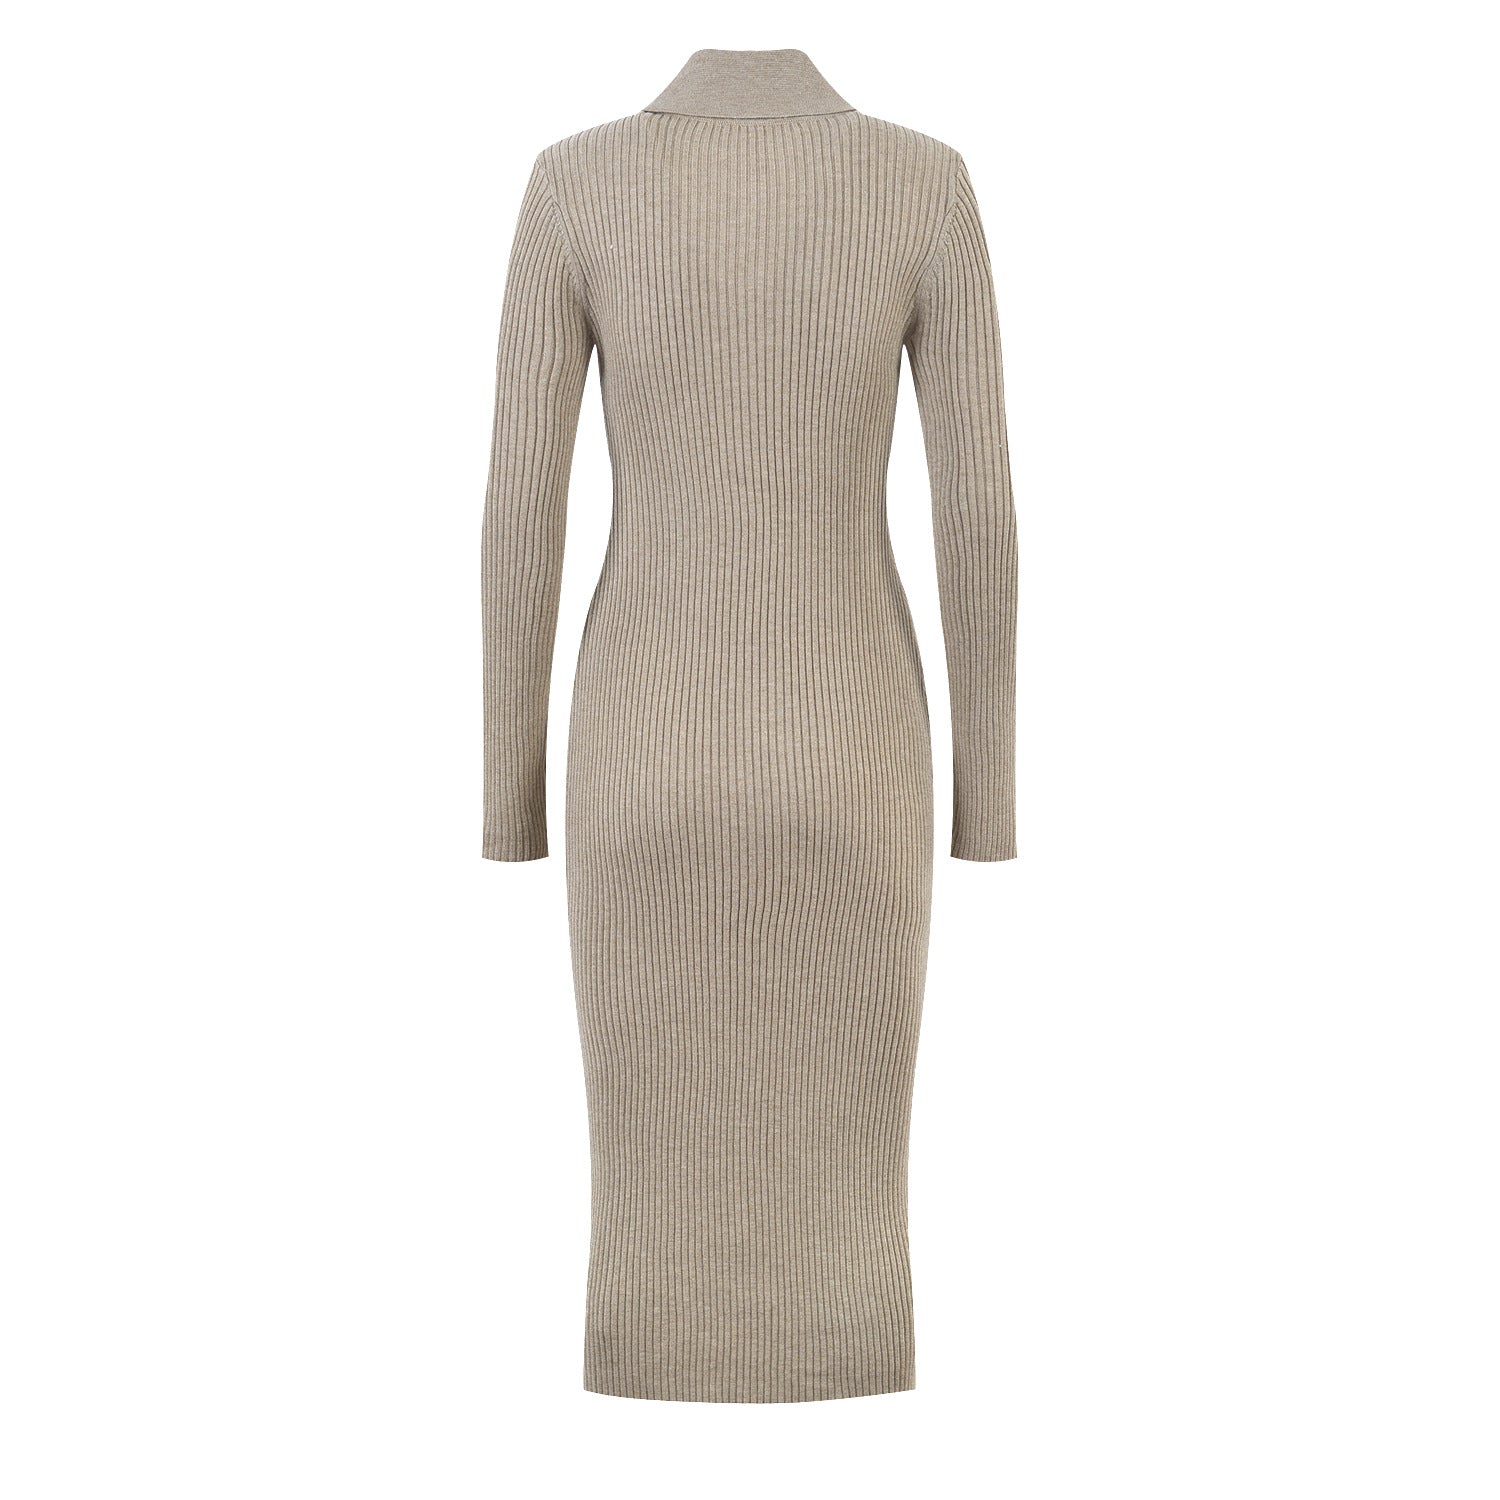 Button Down Mid-Calf Knitted Dress - Kelly Obi New York